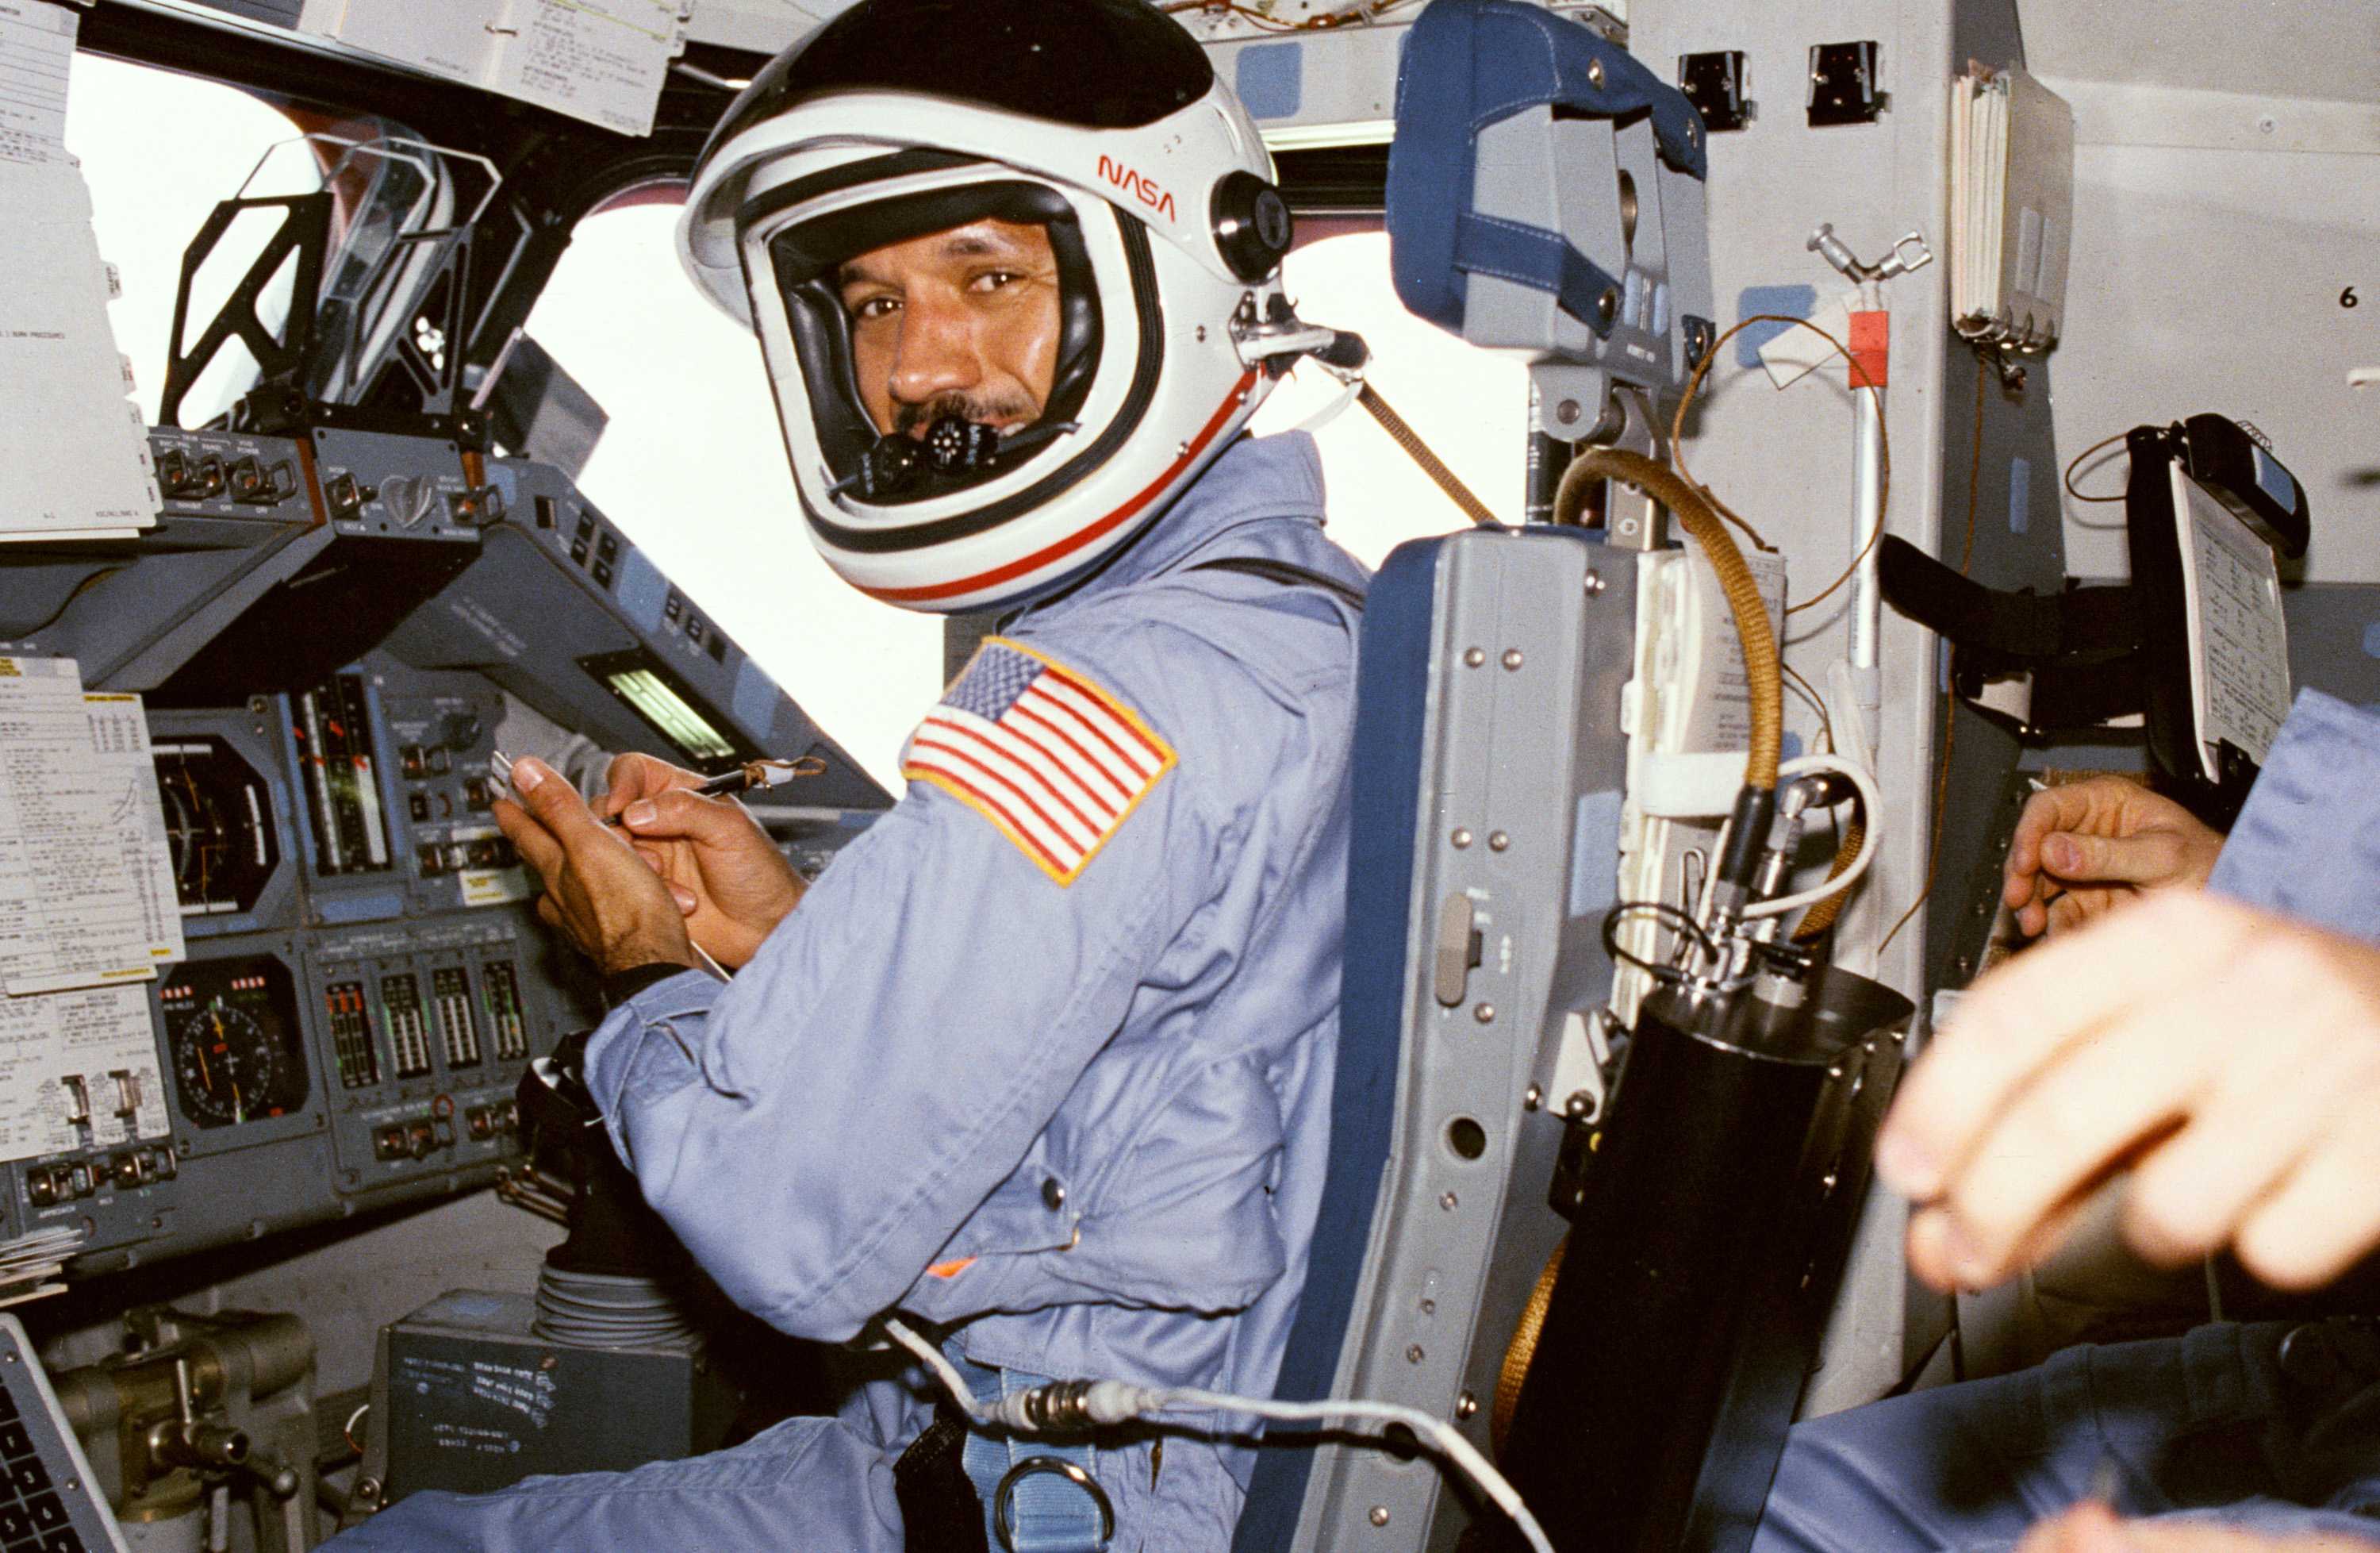 Major General Charles sitting in the pilot seat, dressed in a light blue space suit, with a pen in his hand.